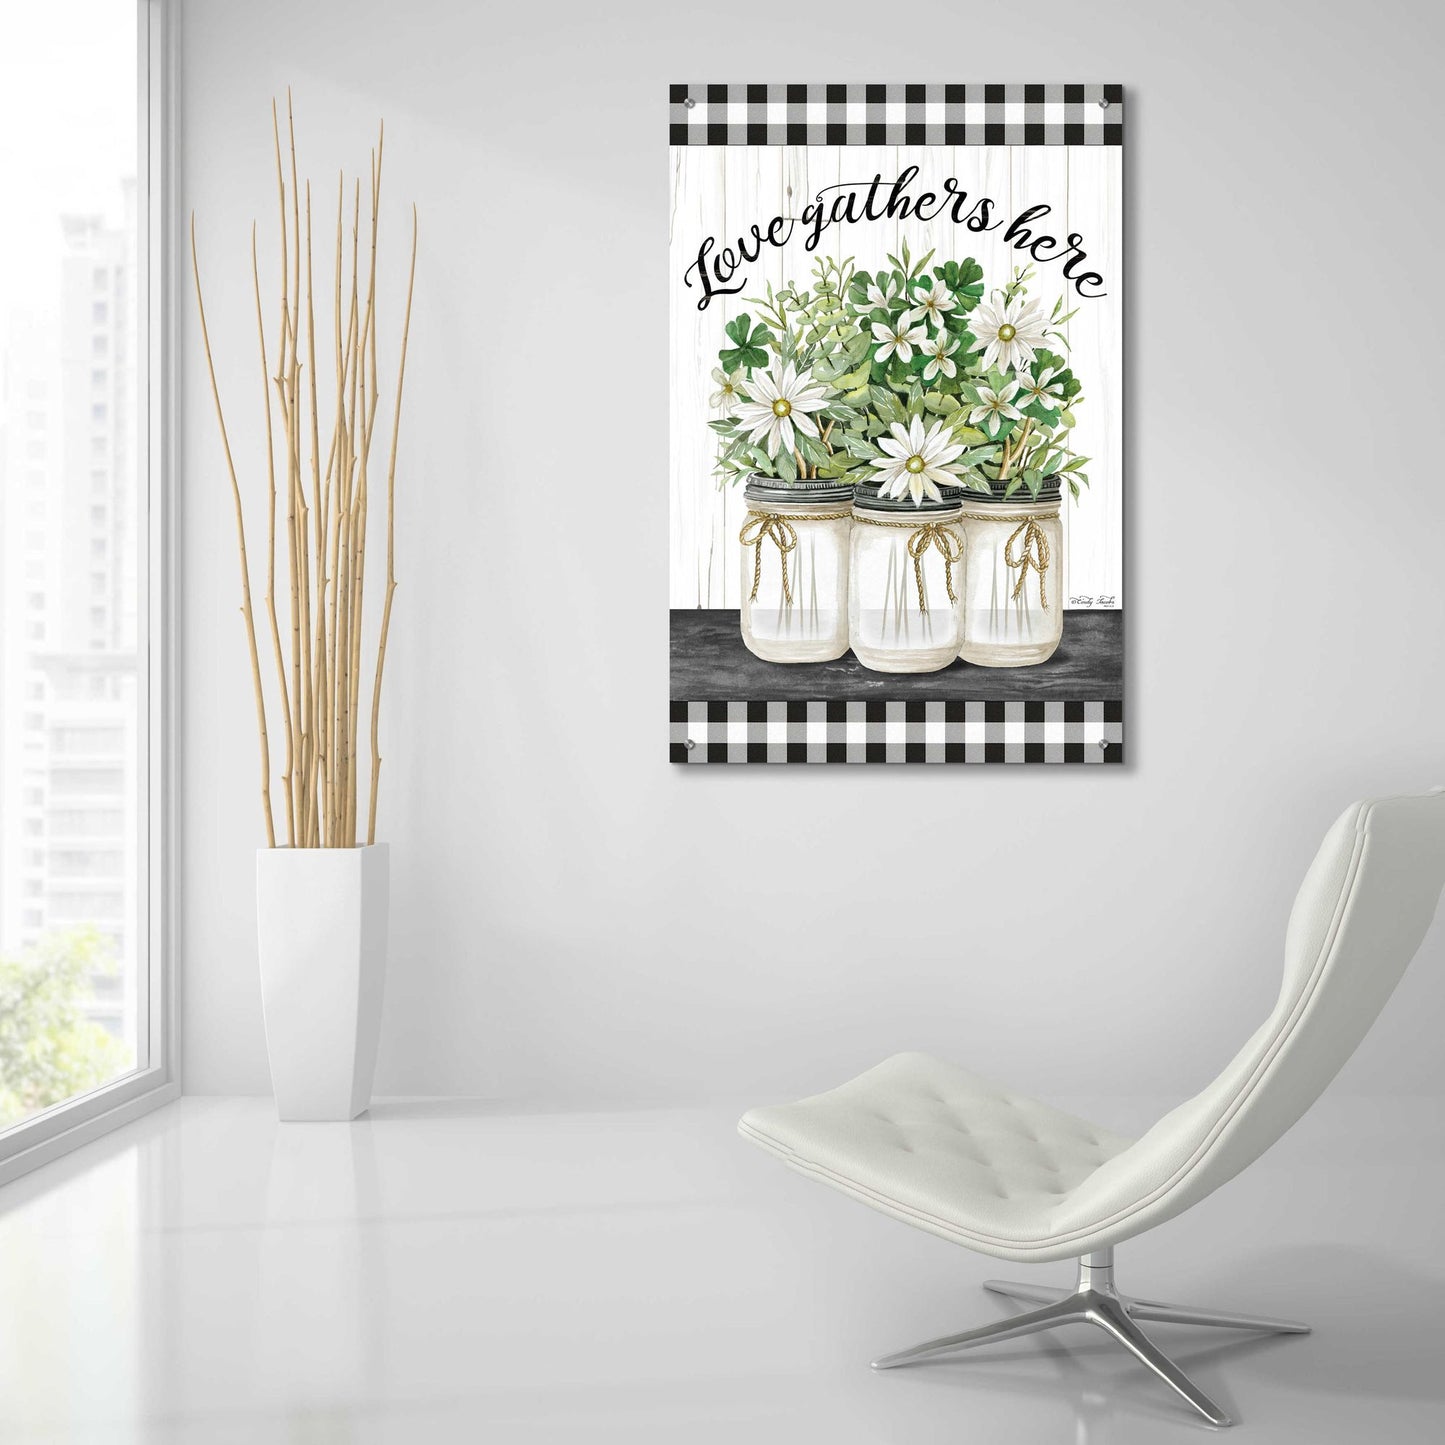 Epic Art 'Love Gathers Here' by Cindy Jacobs, Acrylic Glass Wall Art,24x36